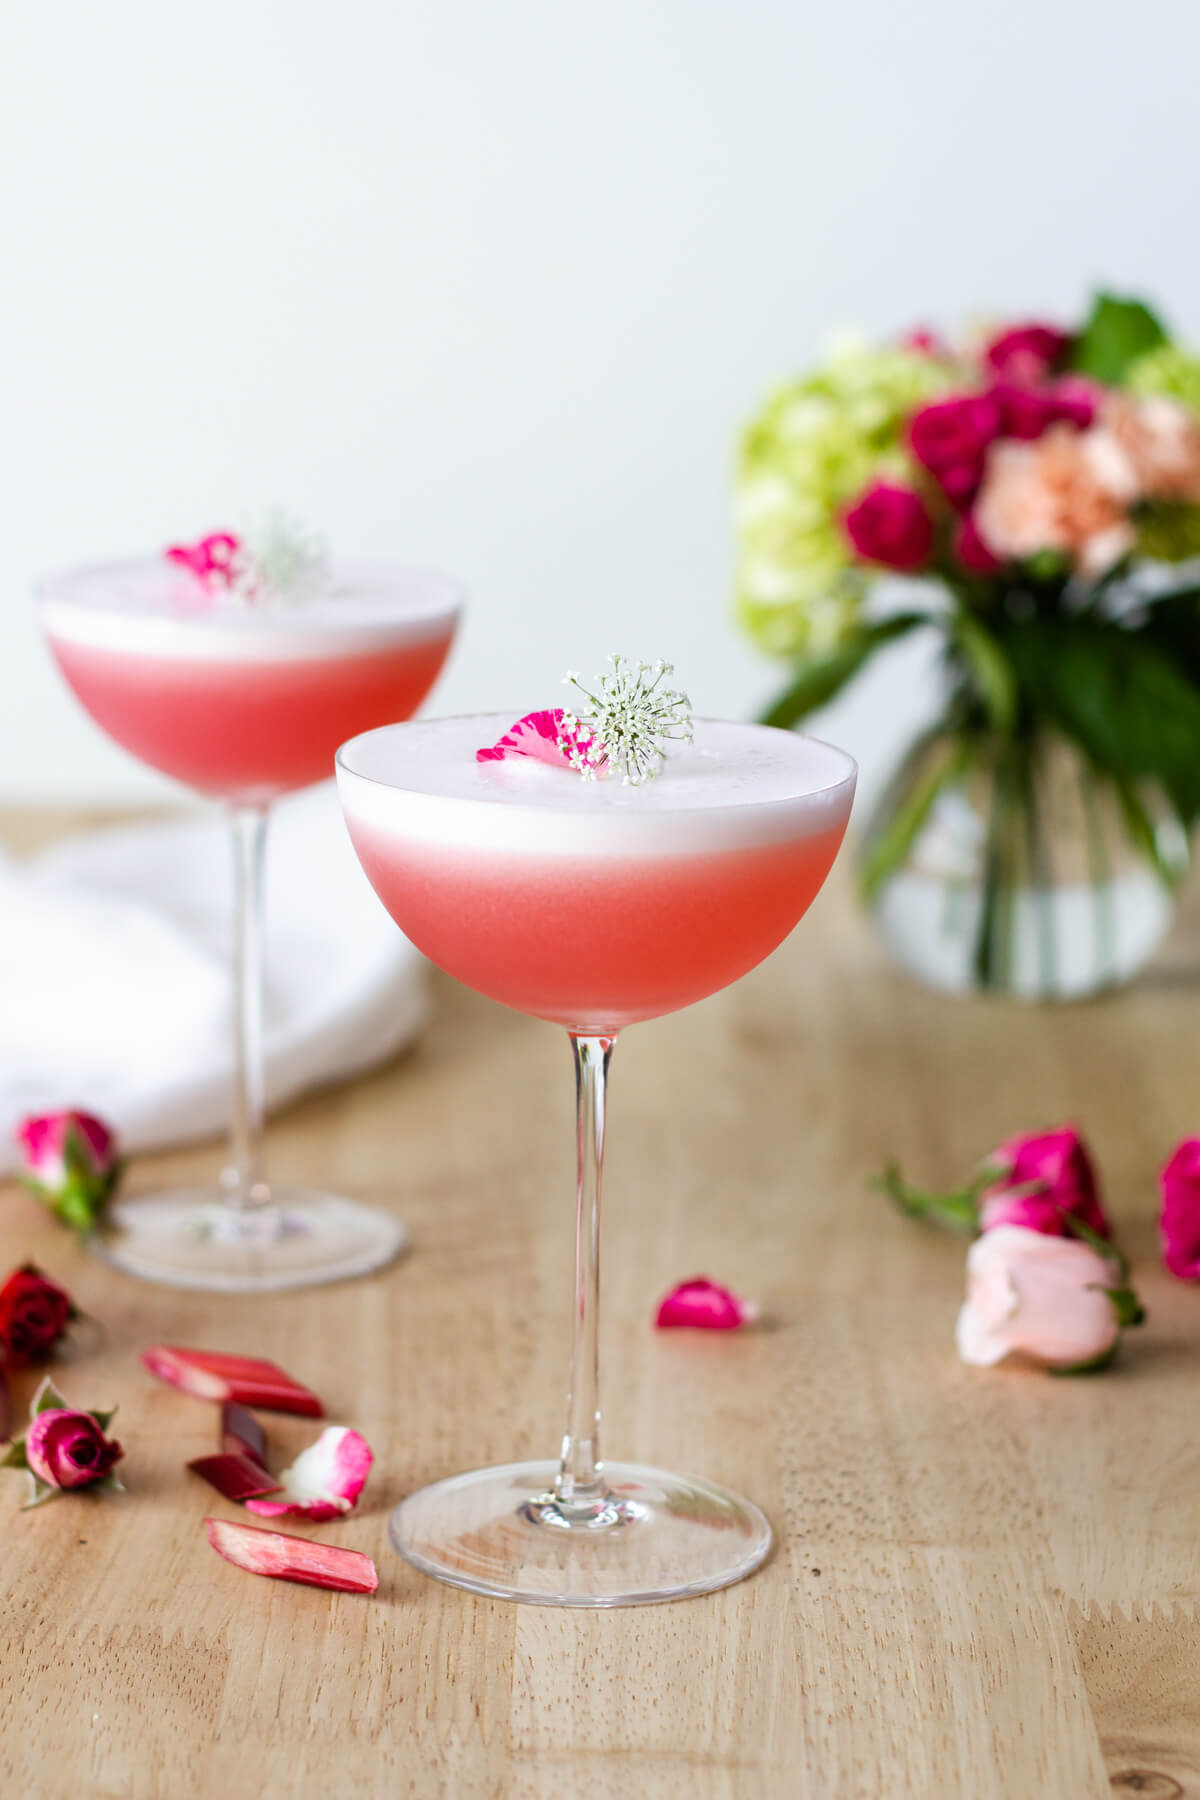 The Rhubarb Rose Gin Sour makes for a refreshingly beautiful cocktail. This is a fun way to use up all of those rhubarb plants growing in your garden. Cocktail recipe at www.designsofanykind.com